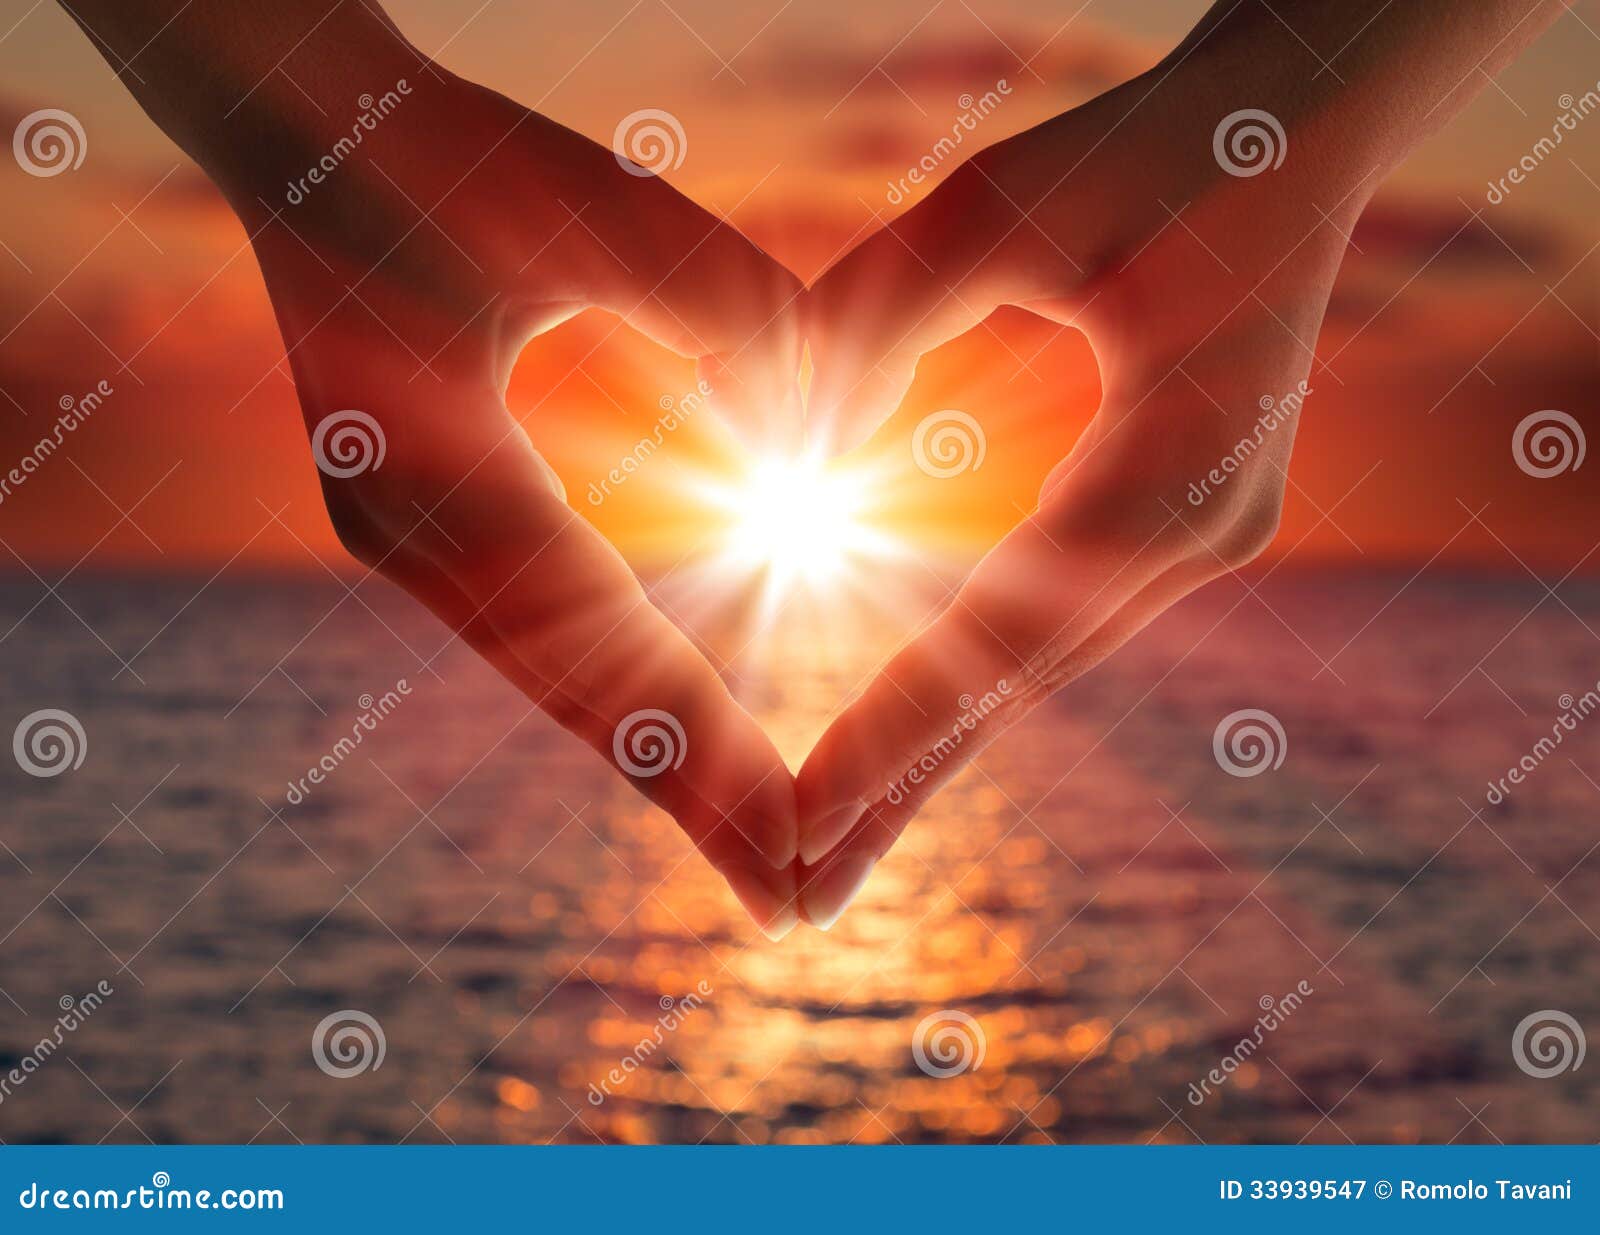 Sunset In Heart Hands Royalty Free Stock Photography - Image: 33939547